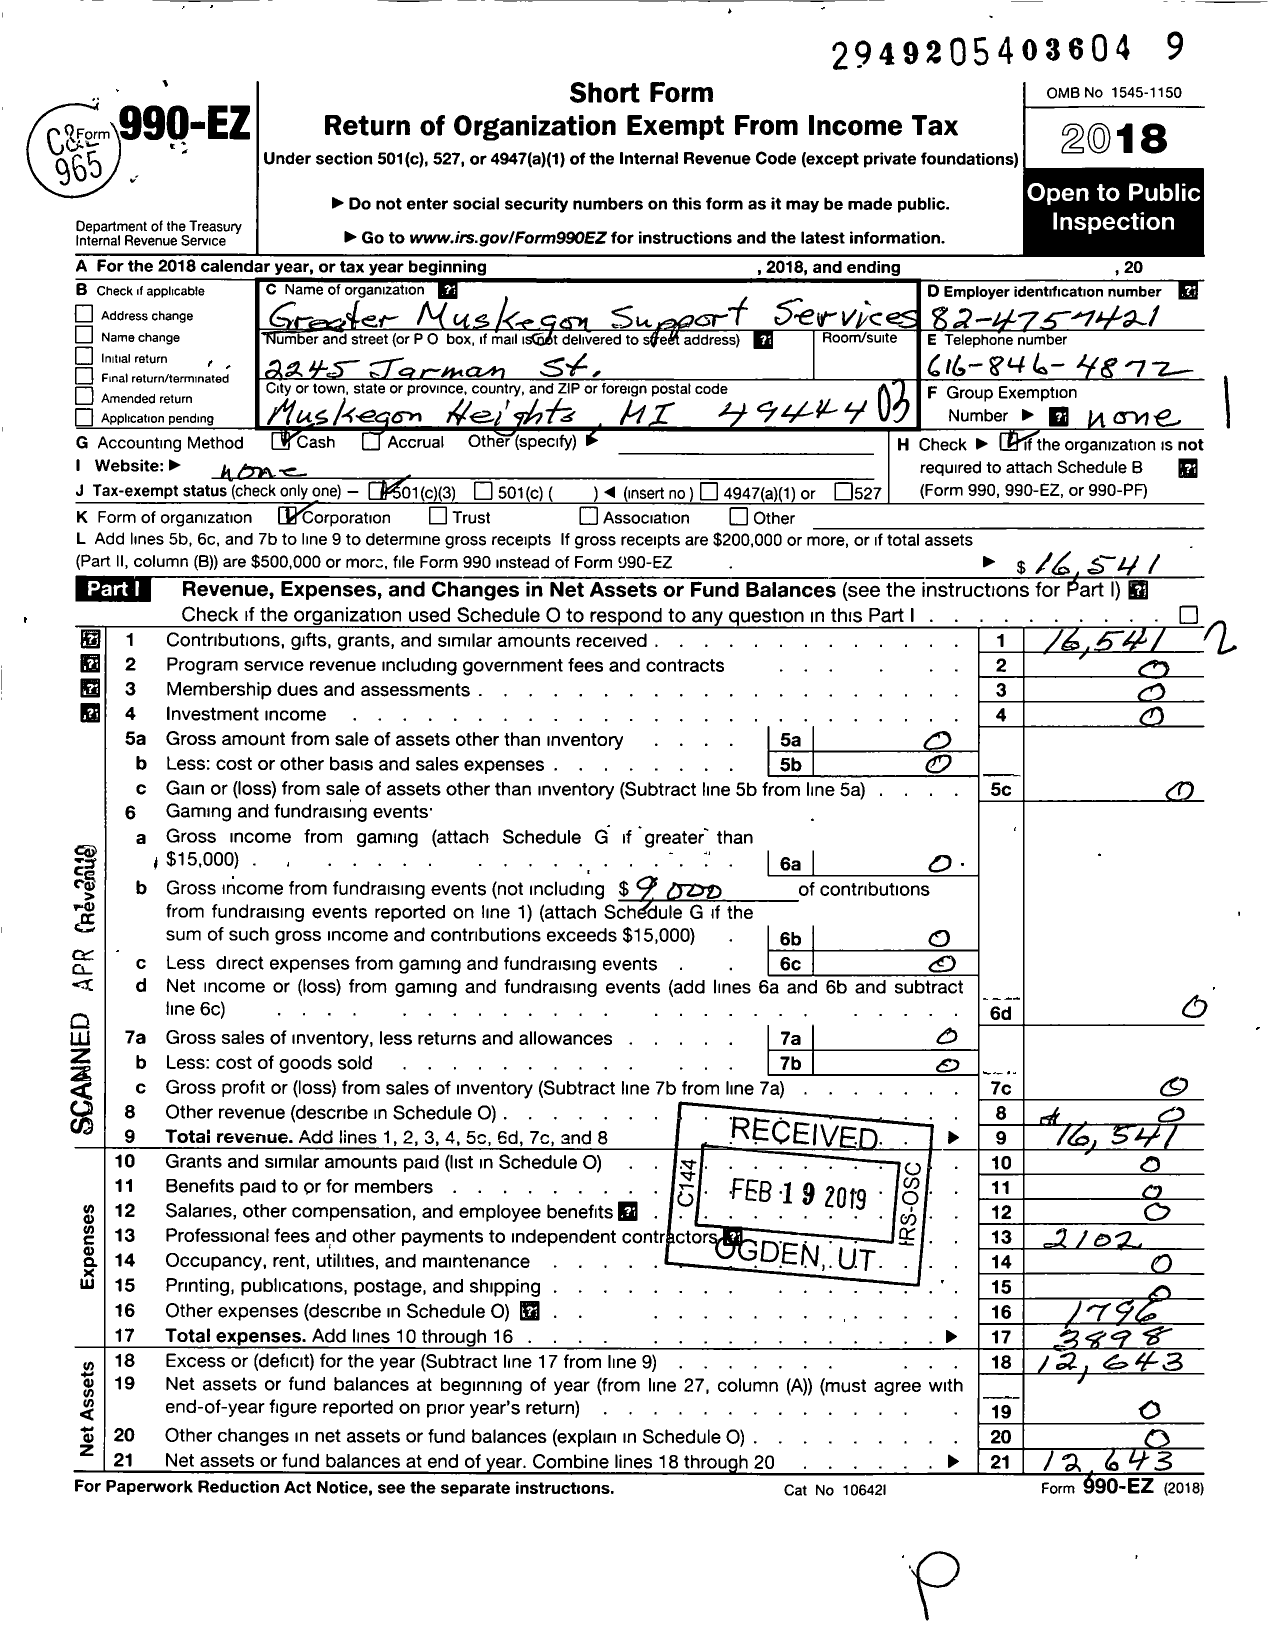 Image of first page of 2018 Form 990EZ for Greater Muskegon Support Services